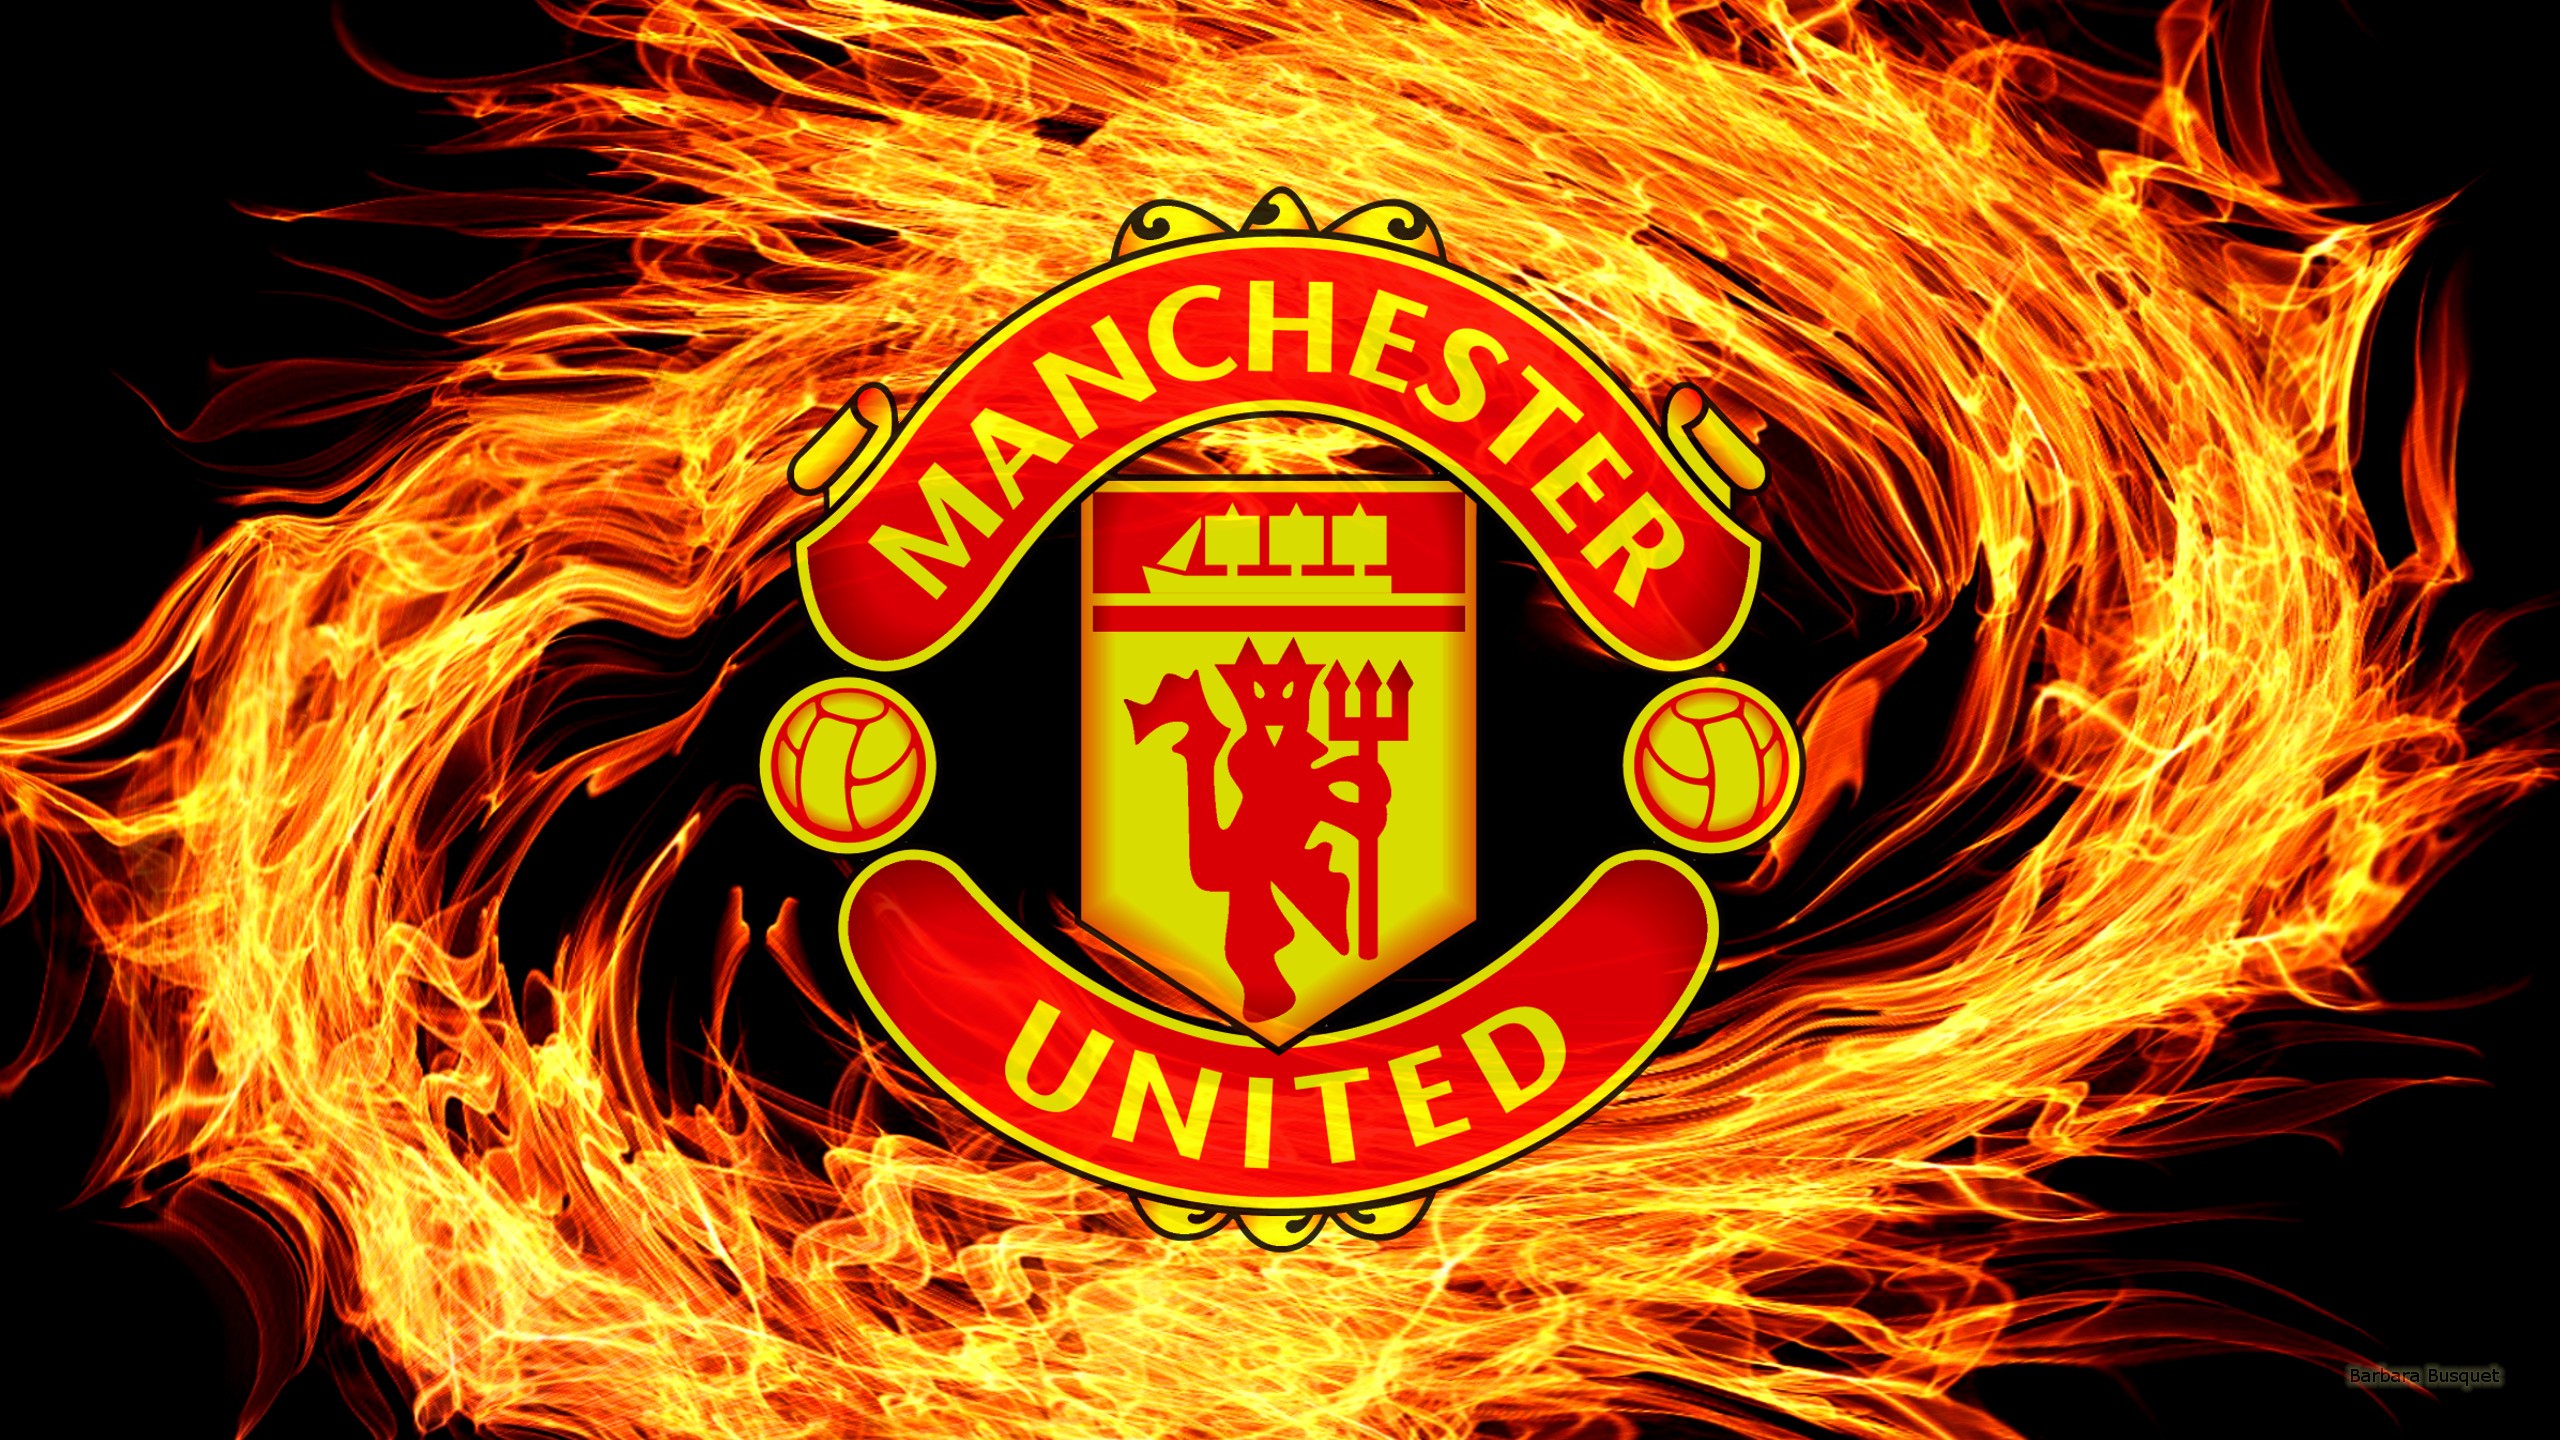 manchester united images free download